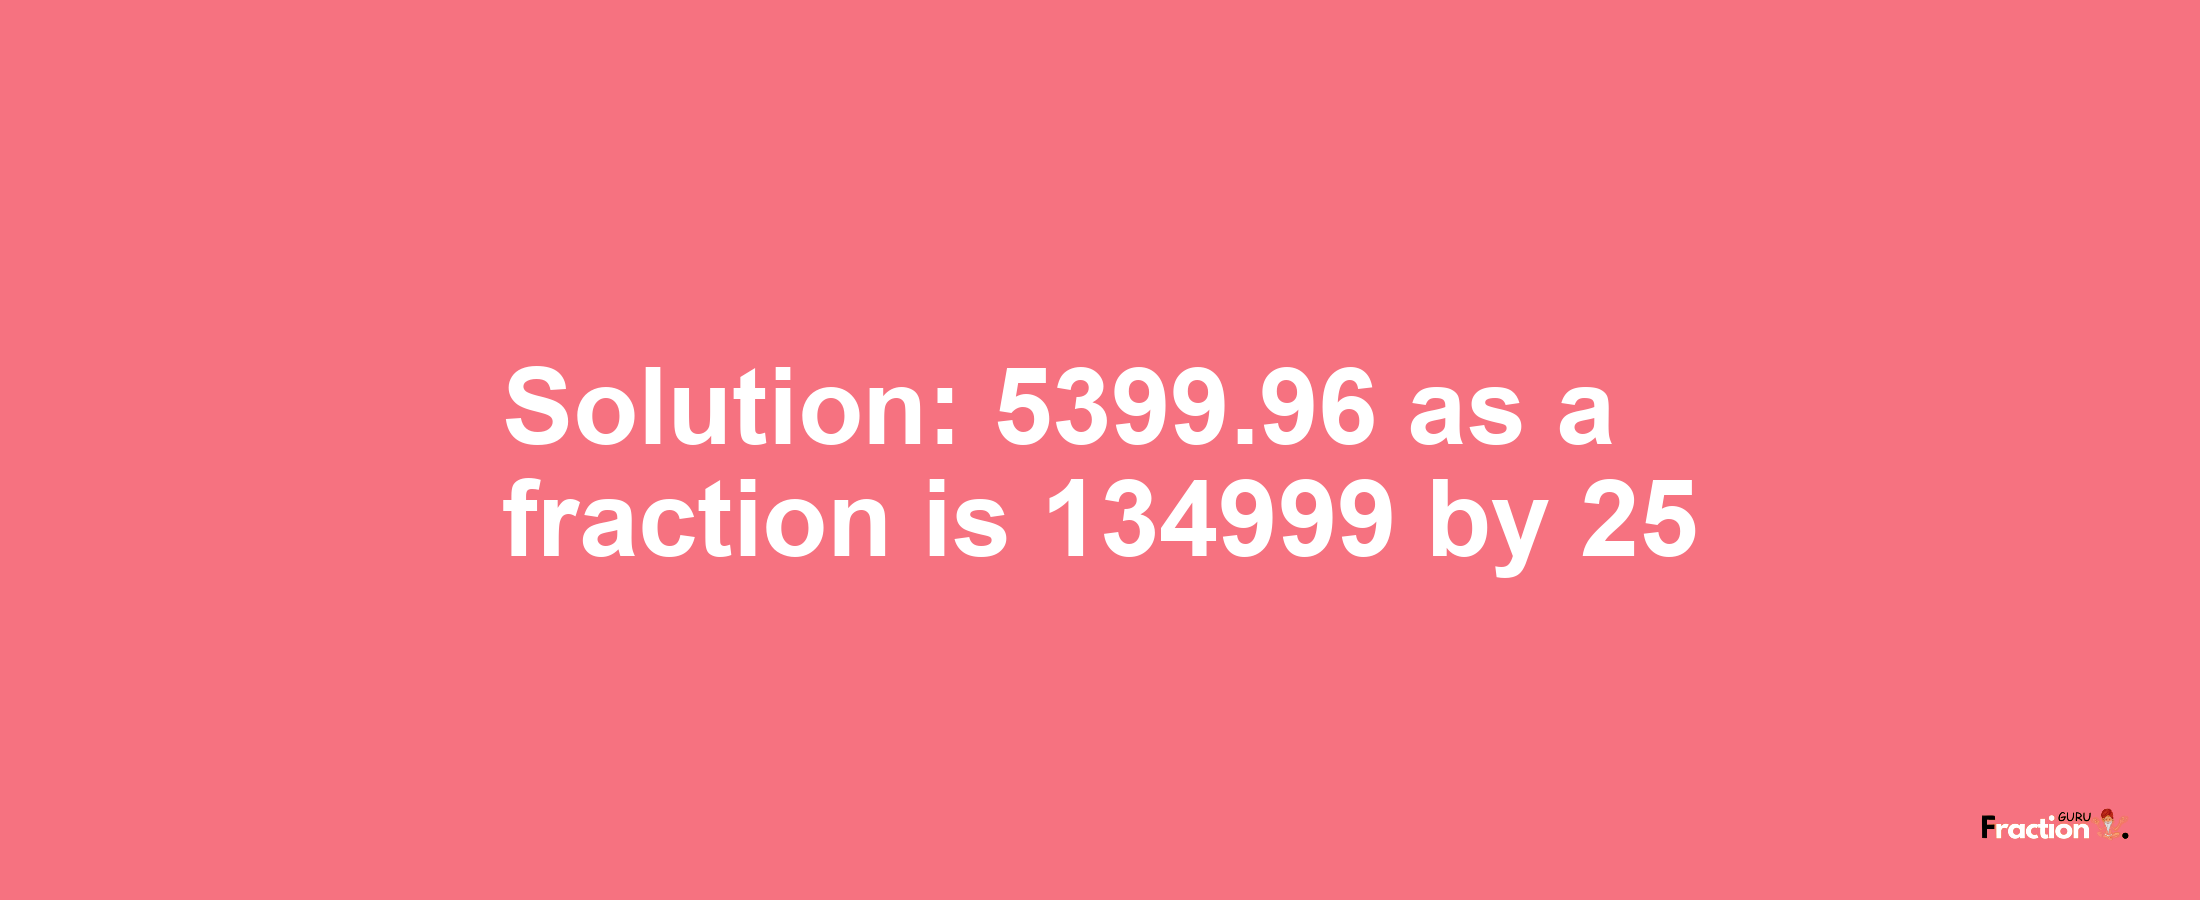 Solution:5399.96 as a fraction is 134999/25